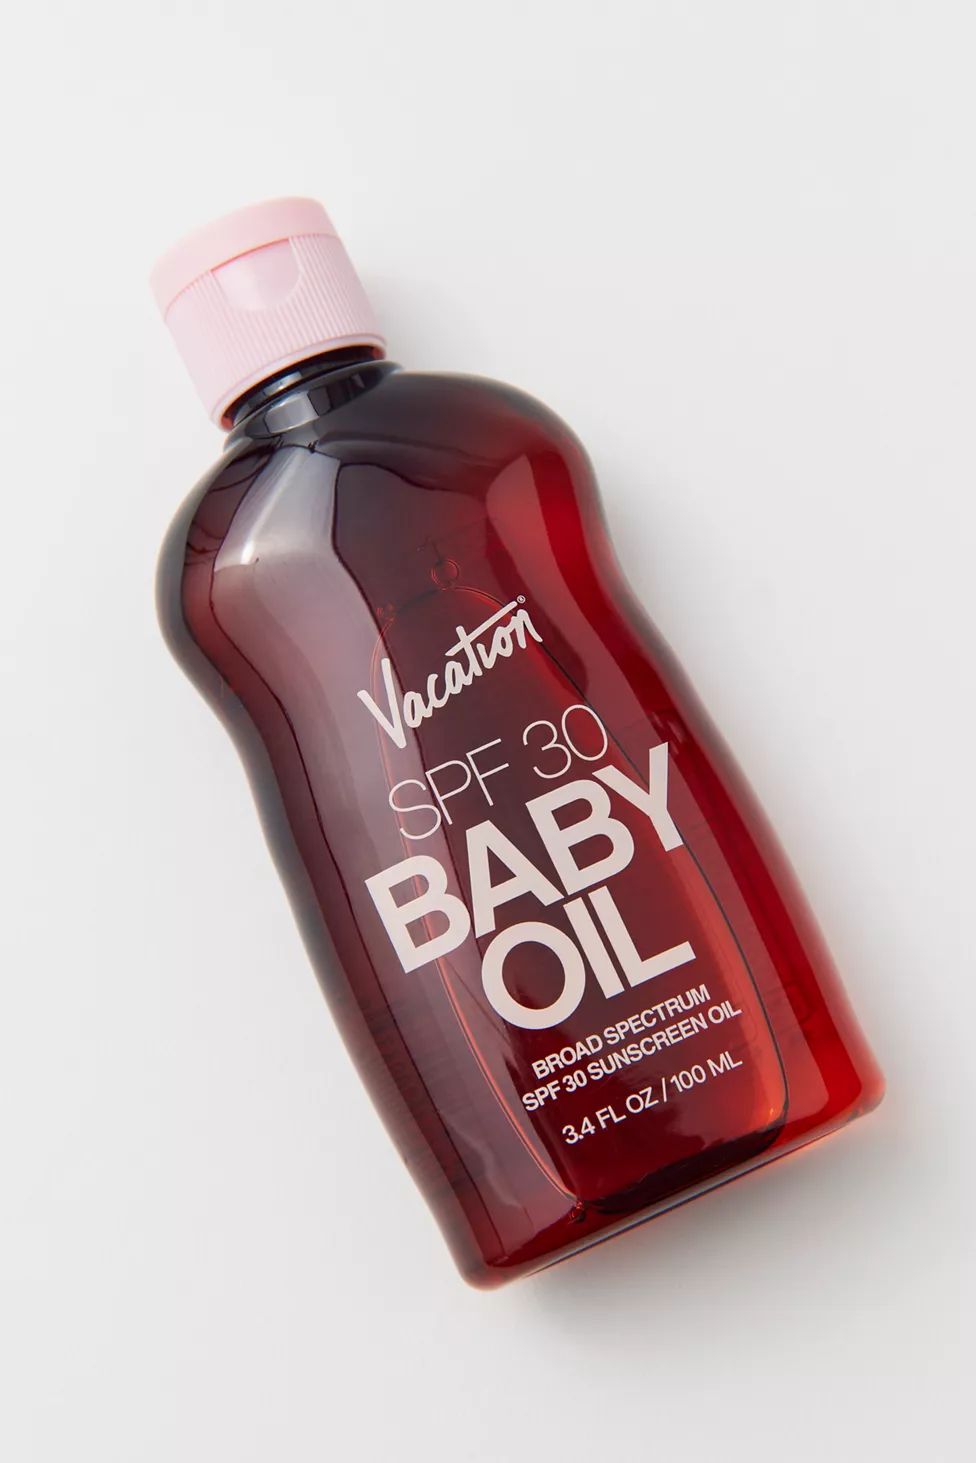 Vacation SPF 30 Baby Sunscreen Oil | Urban Outfitters (US and RoW)